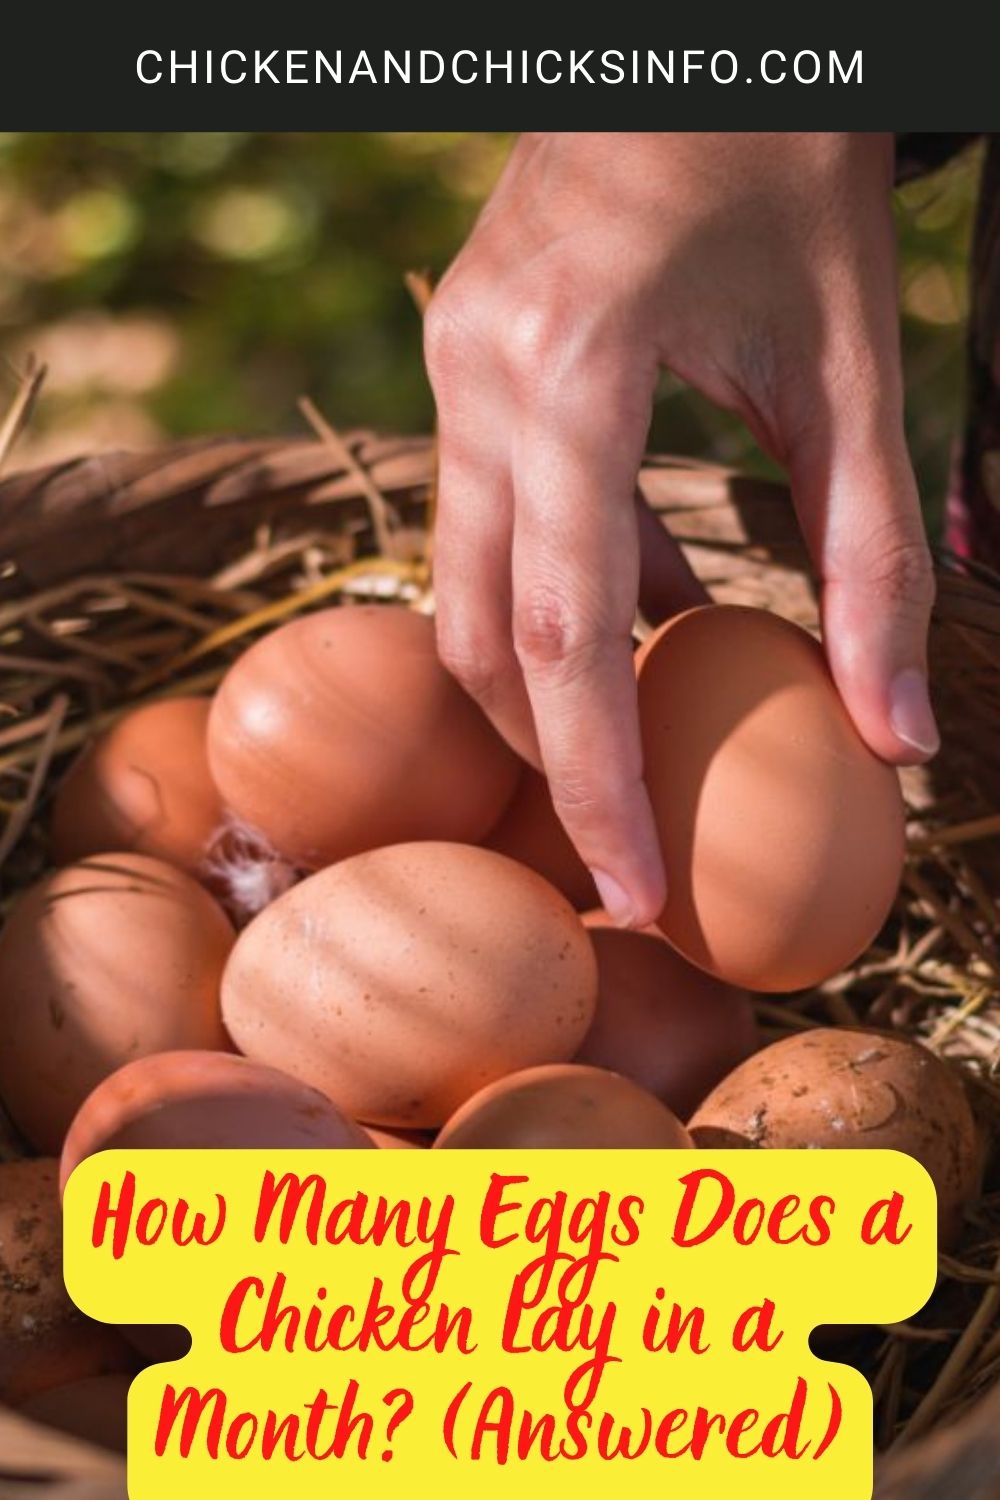 How Many Eggs Does a Chicken Lay in a Month? (Answered) poster.